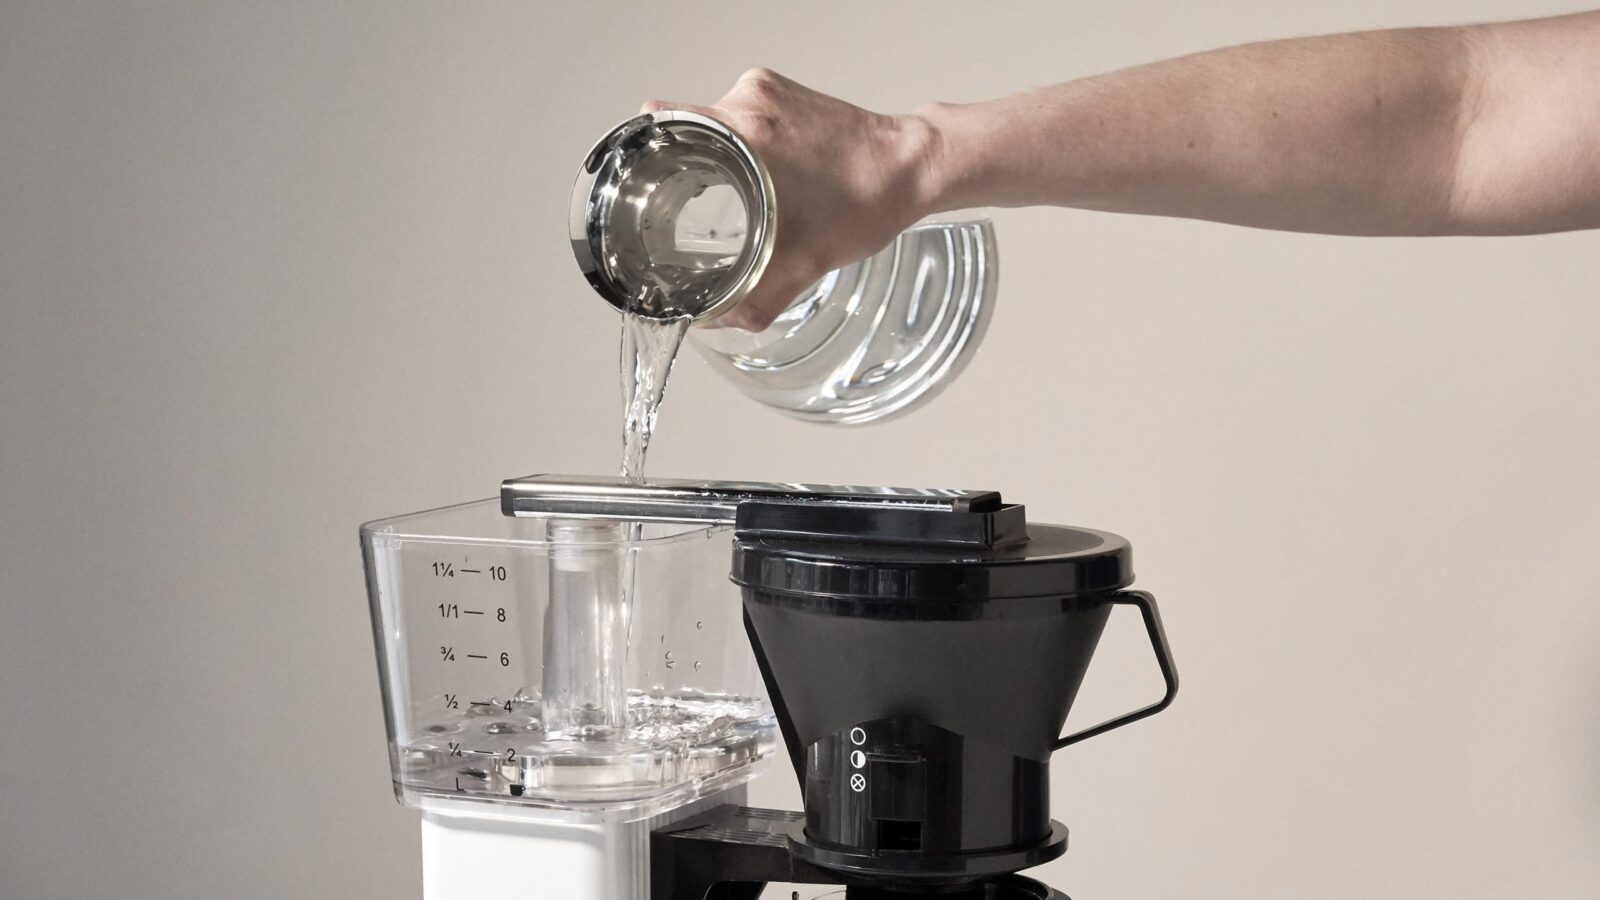 01 TRD20 Coffee Maker Water scaled - Paper Cup